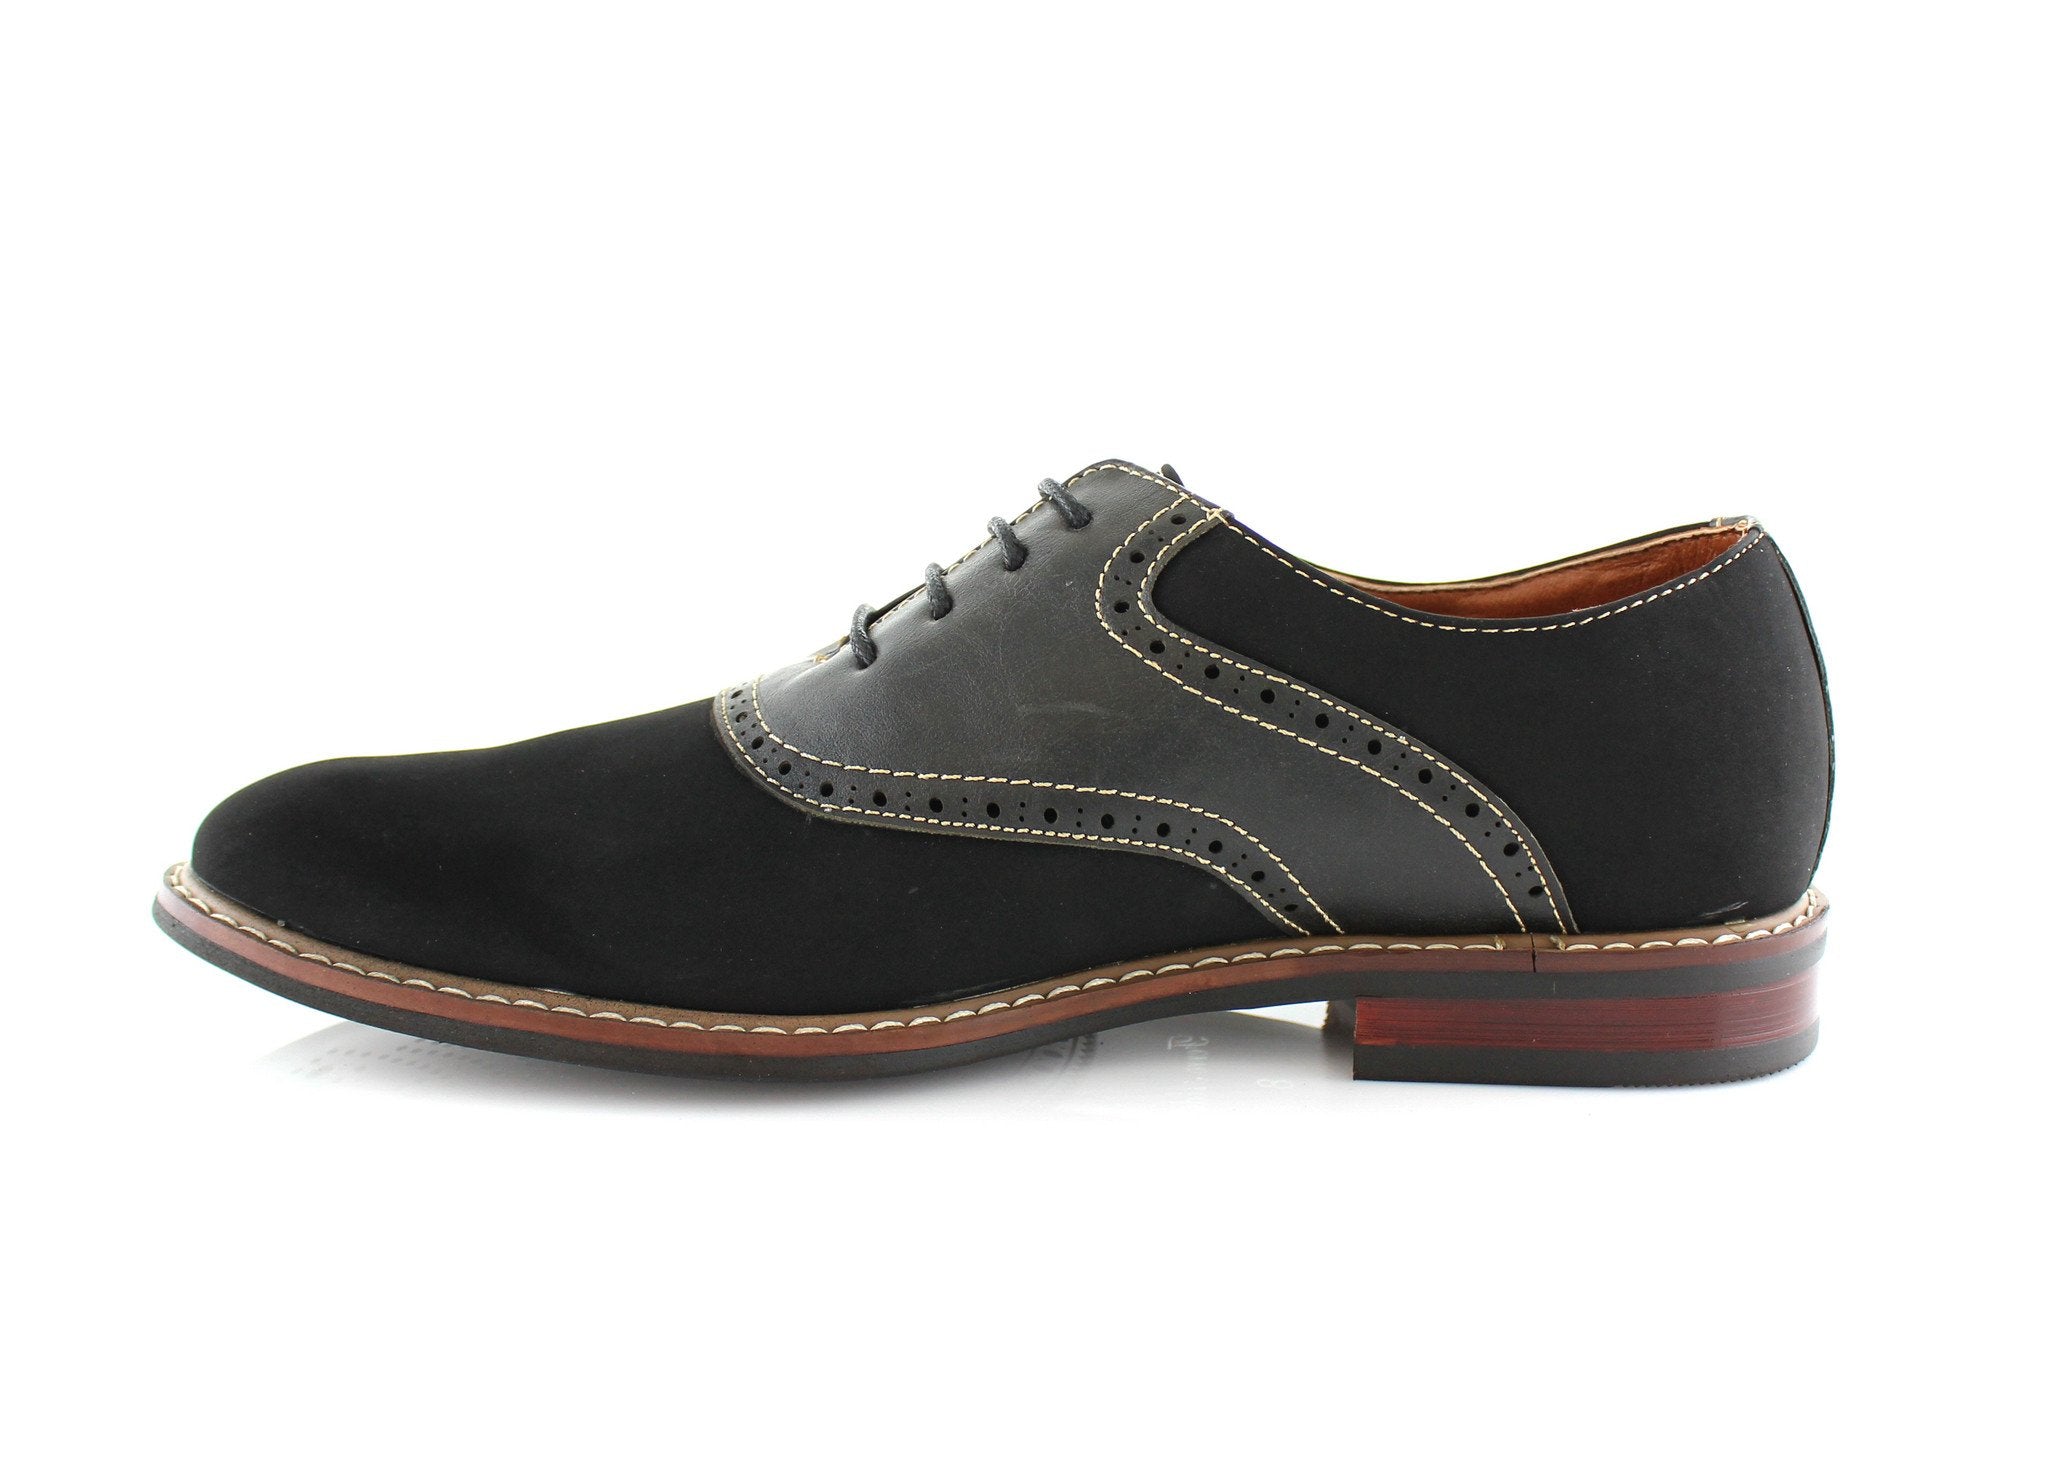 Two-Toned Perforated Oxfords | Jordan by Ferro Aldo | Conal Footwear | Inner Side Angle View